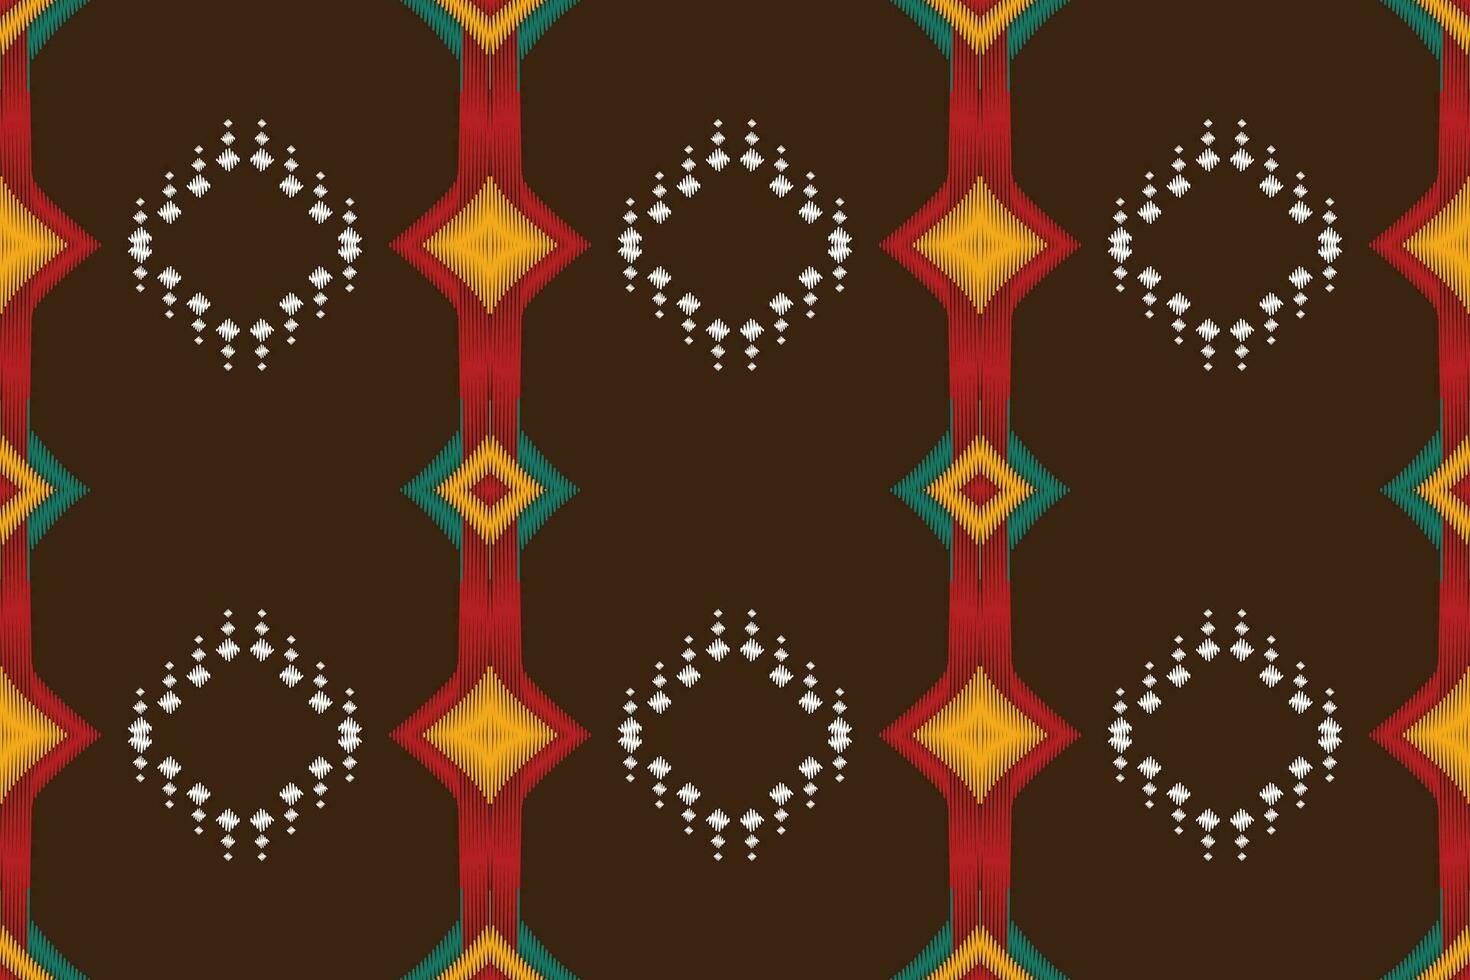 Motif Ikat Paisley Embroidery Background. Ikat Background Geometric Ethnic Oriental Pattern Traditional. Ikat Aztec Style Abstract Design for Print Texture,fabric,saree,sari,carpet. vector